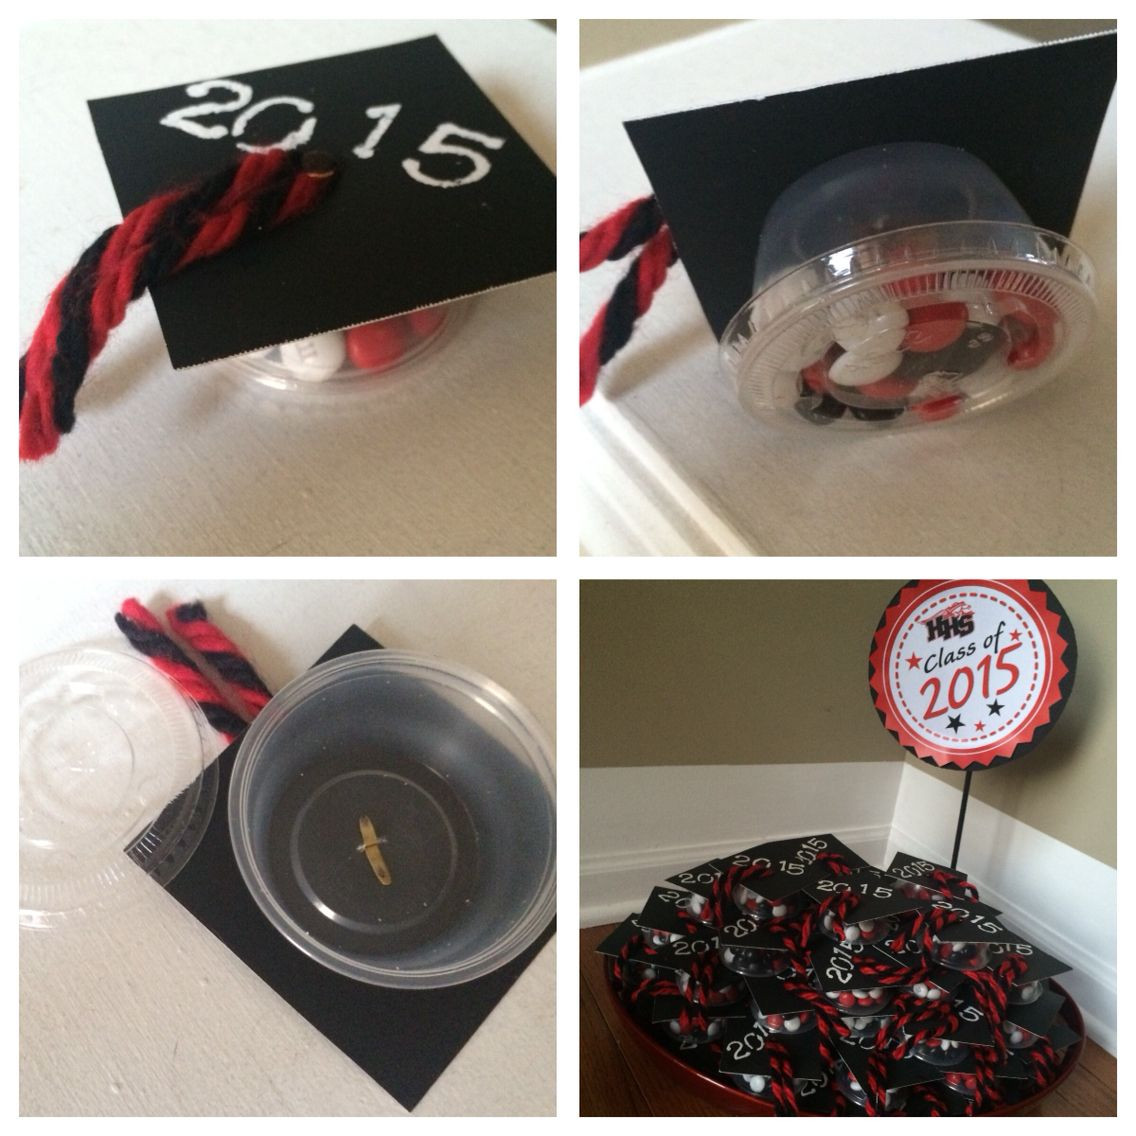 Diy Graduation Party Favor Ideas
 Graduation Party Favors I made these using 3"x3" black